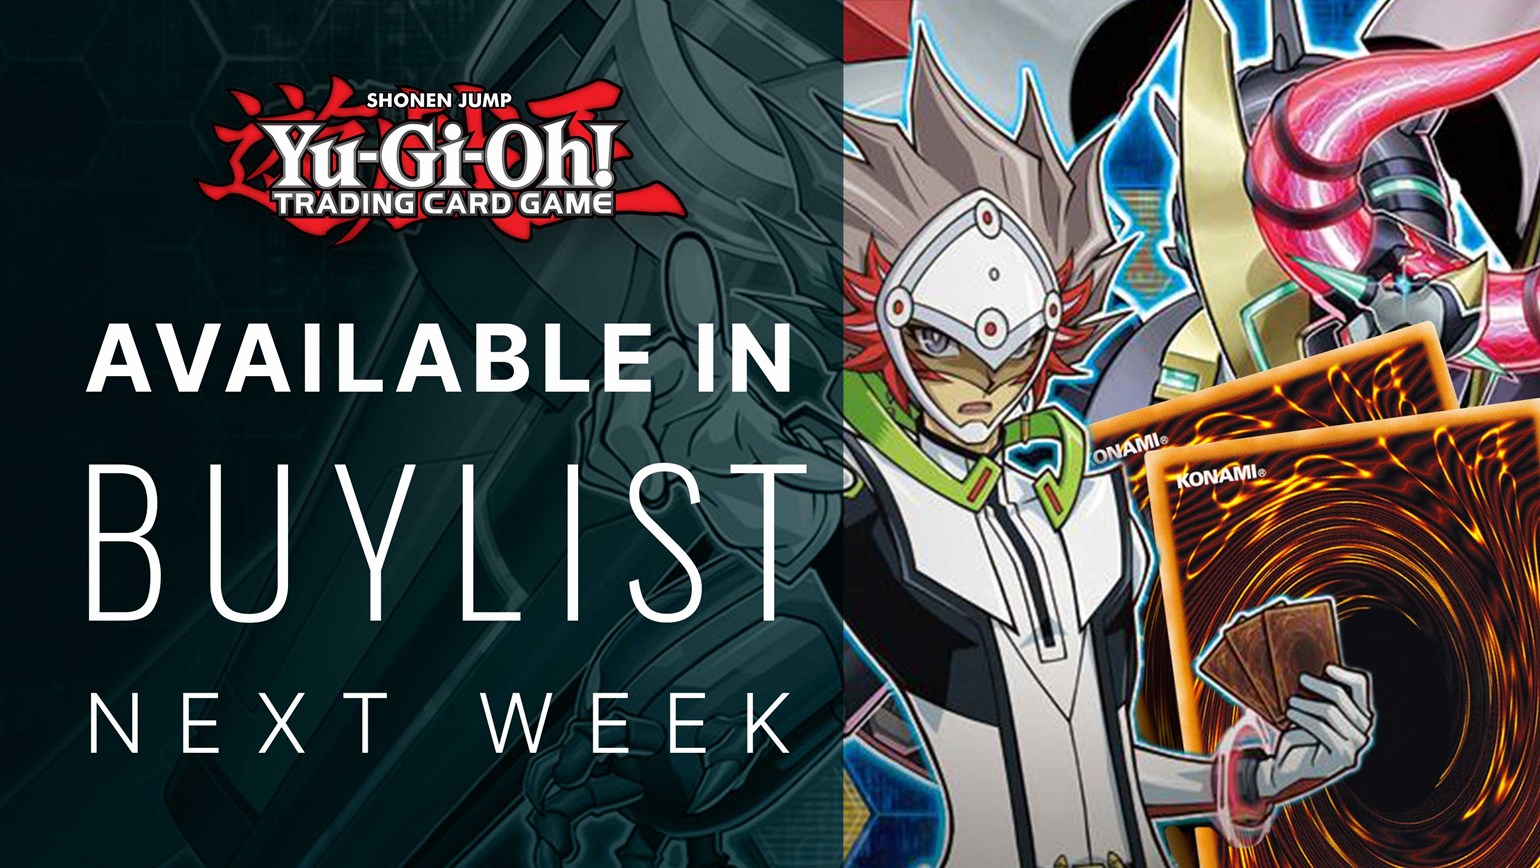 Yu-Gi-Oh! Coming Next Week to Buylist on Your TCGplayer Pro Showcase and Website